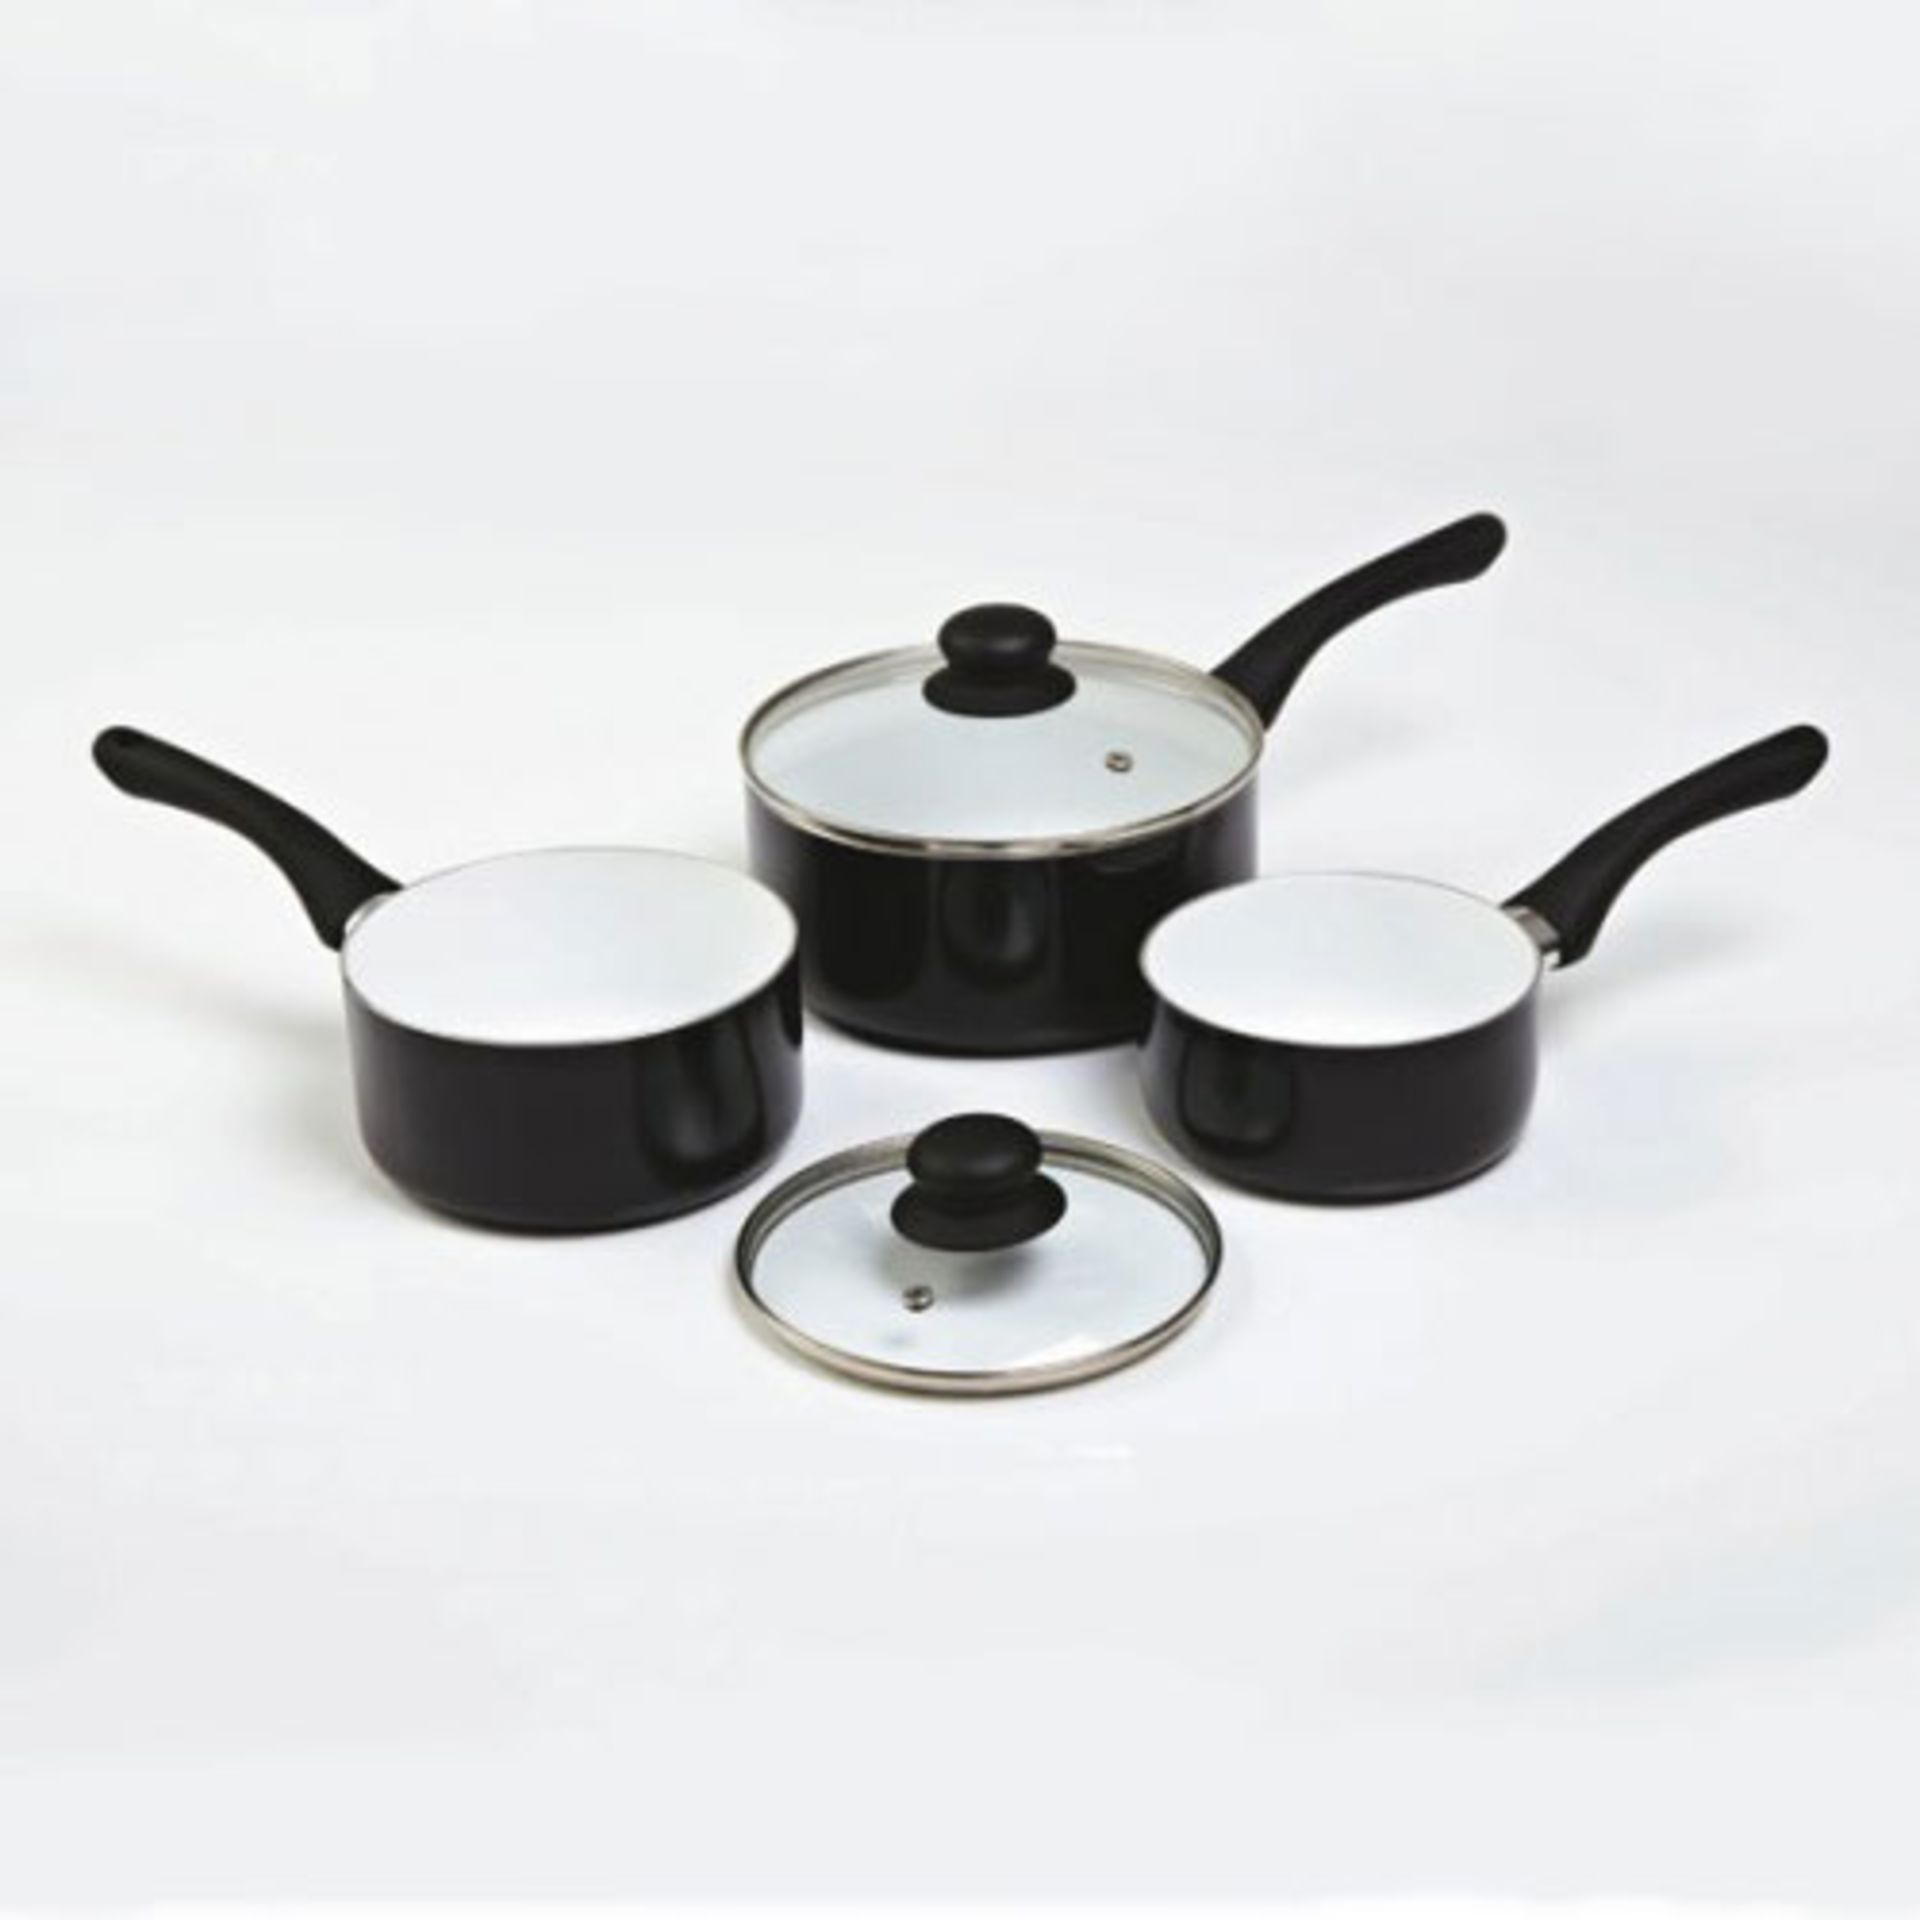 V Brand New Five Piece Cermalon Non Stick Ceramic Coating Green Sauce Pan Set With Glass Lids